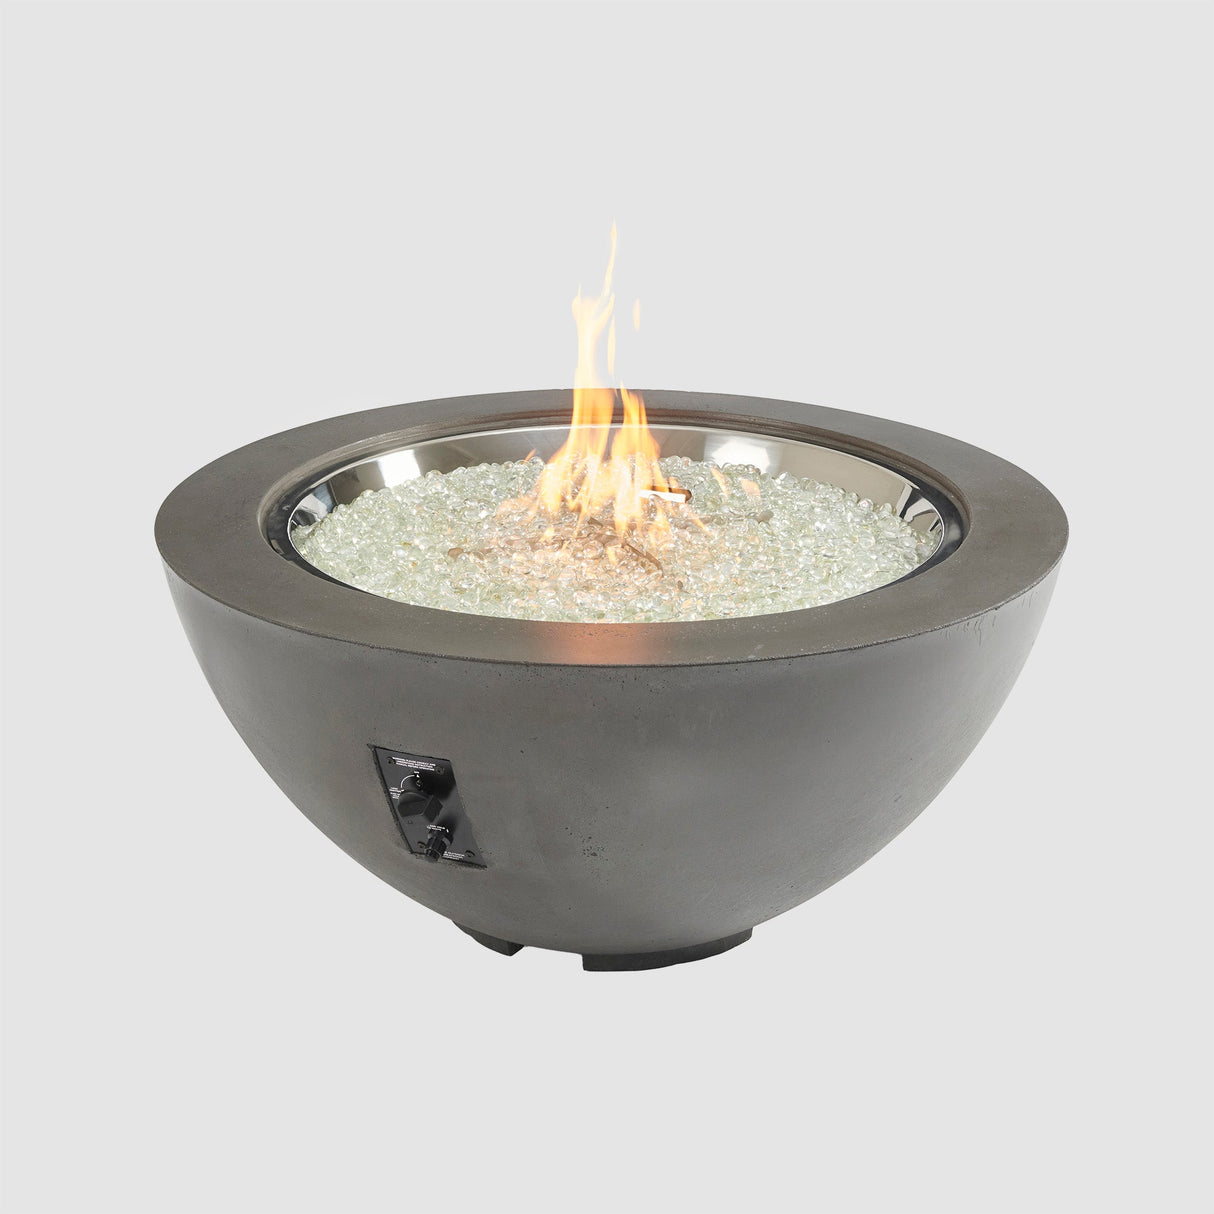 Midnight Mist Cove Round Gas Fire Pit Bowl 42" on a grey background